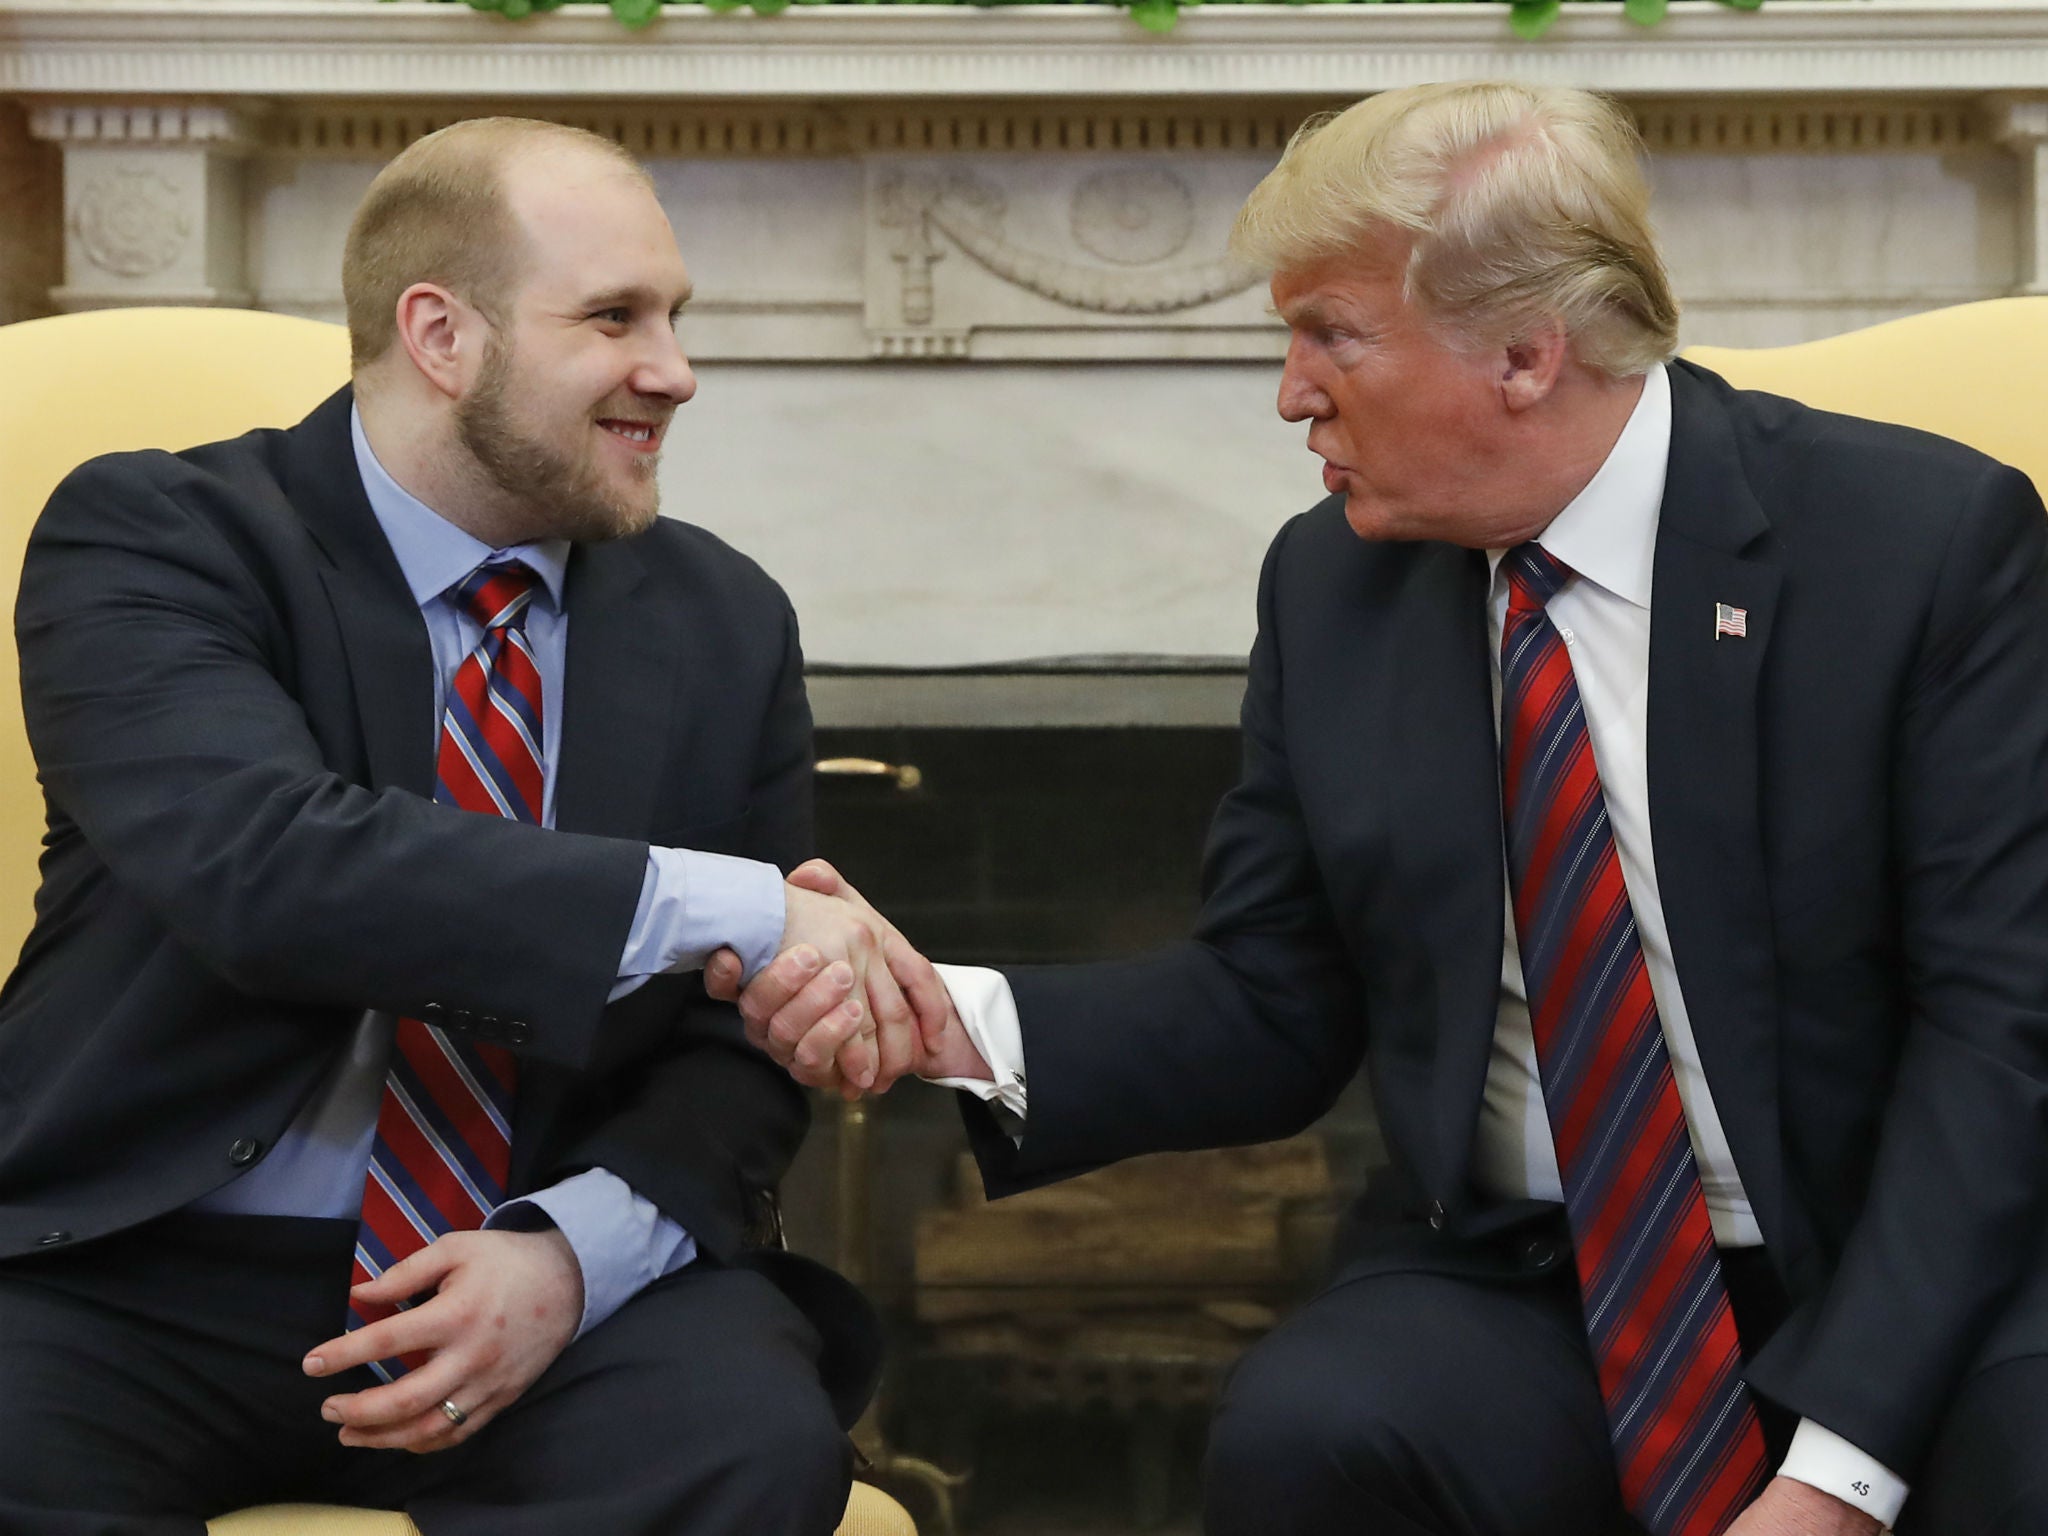 President Donald Trump shakes hands with Joshua Holt at the White House